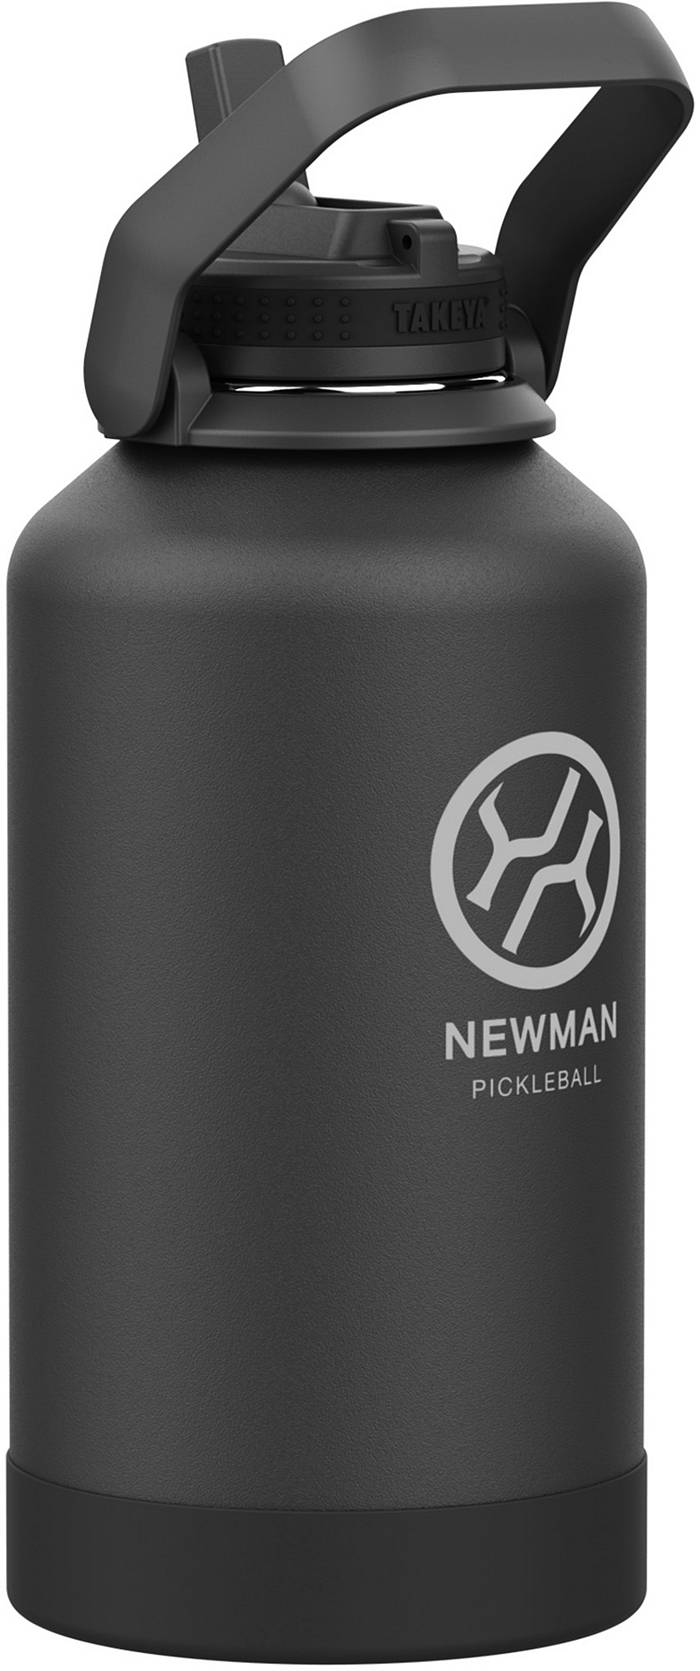 Takeya Newman Pickleball Insulated Water Bottle with Sport Straw Lid and Extra Large Carry Handle 64oz Ace Black